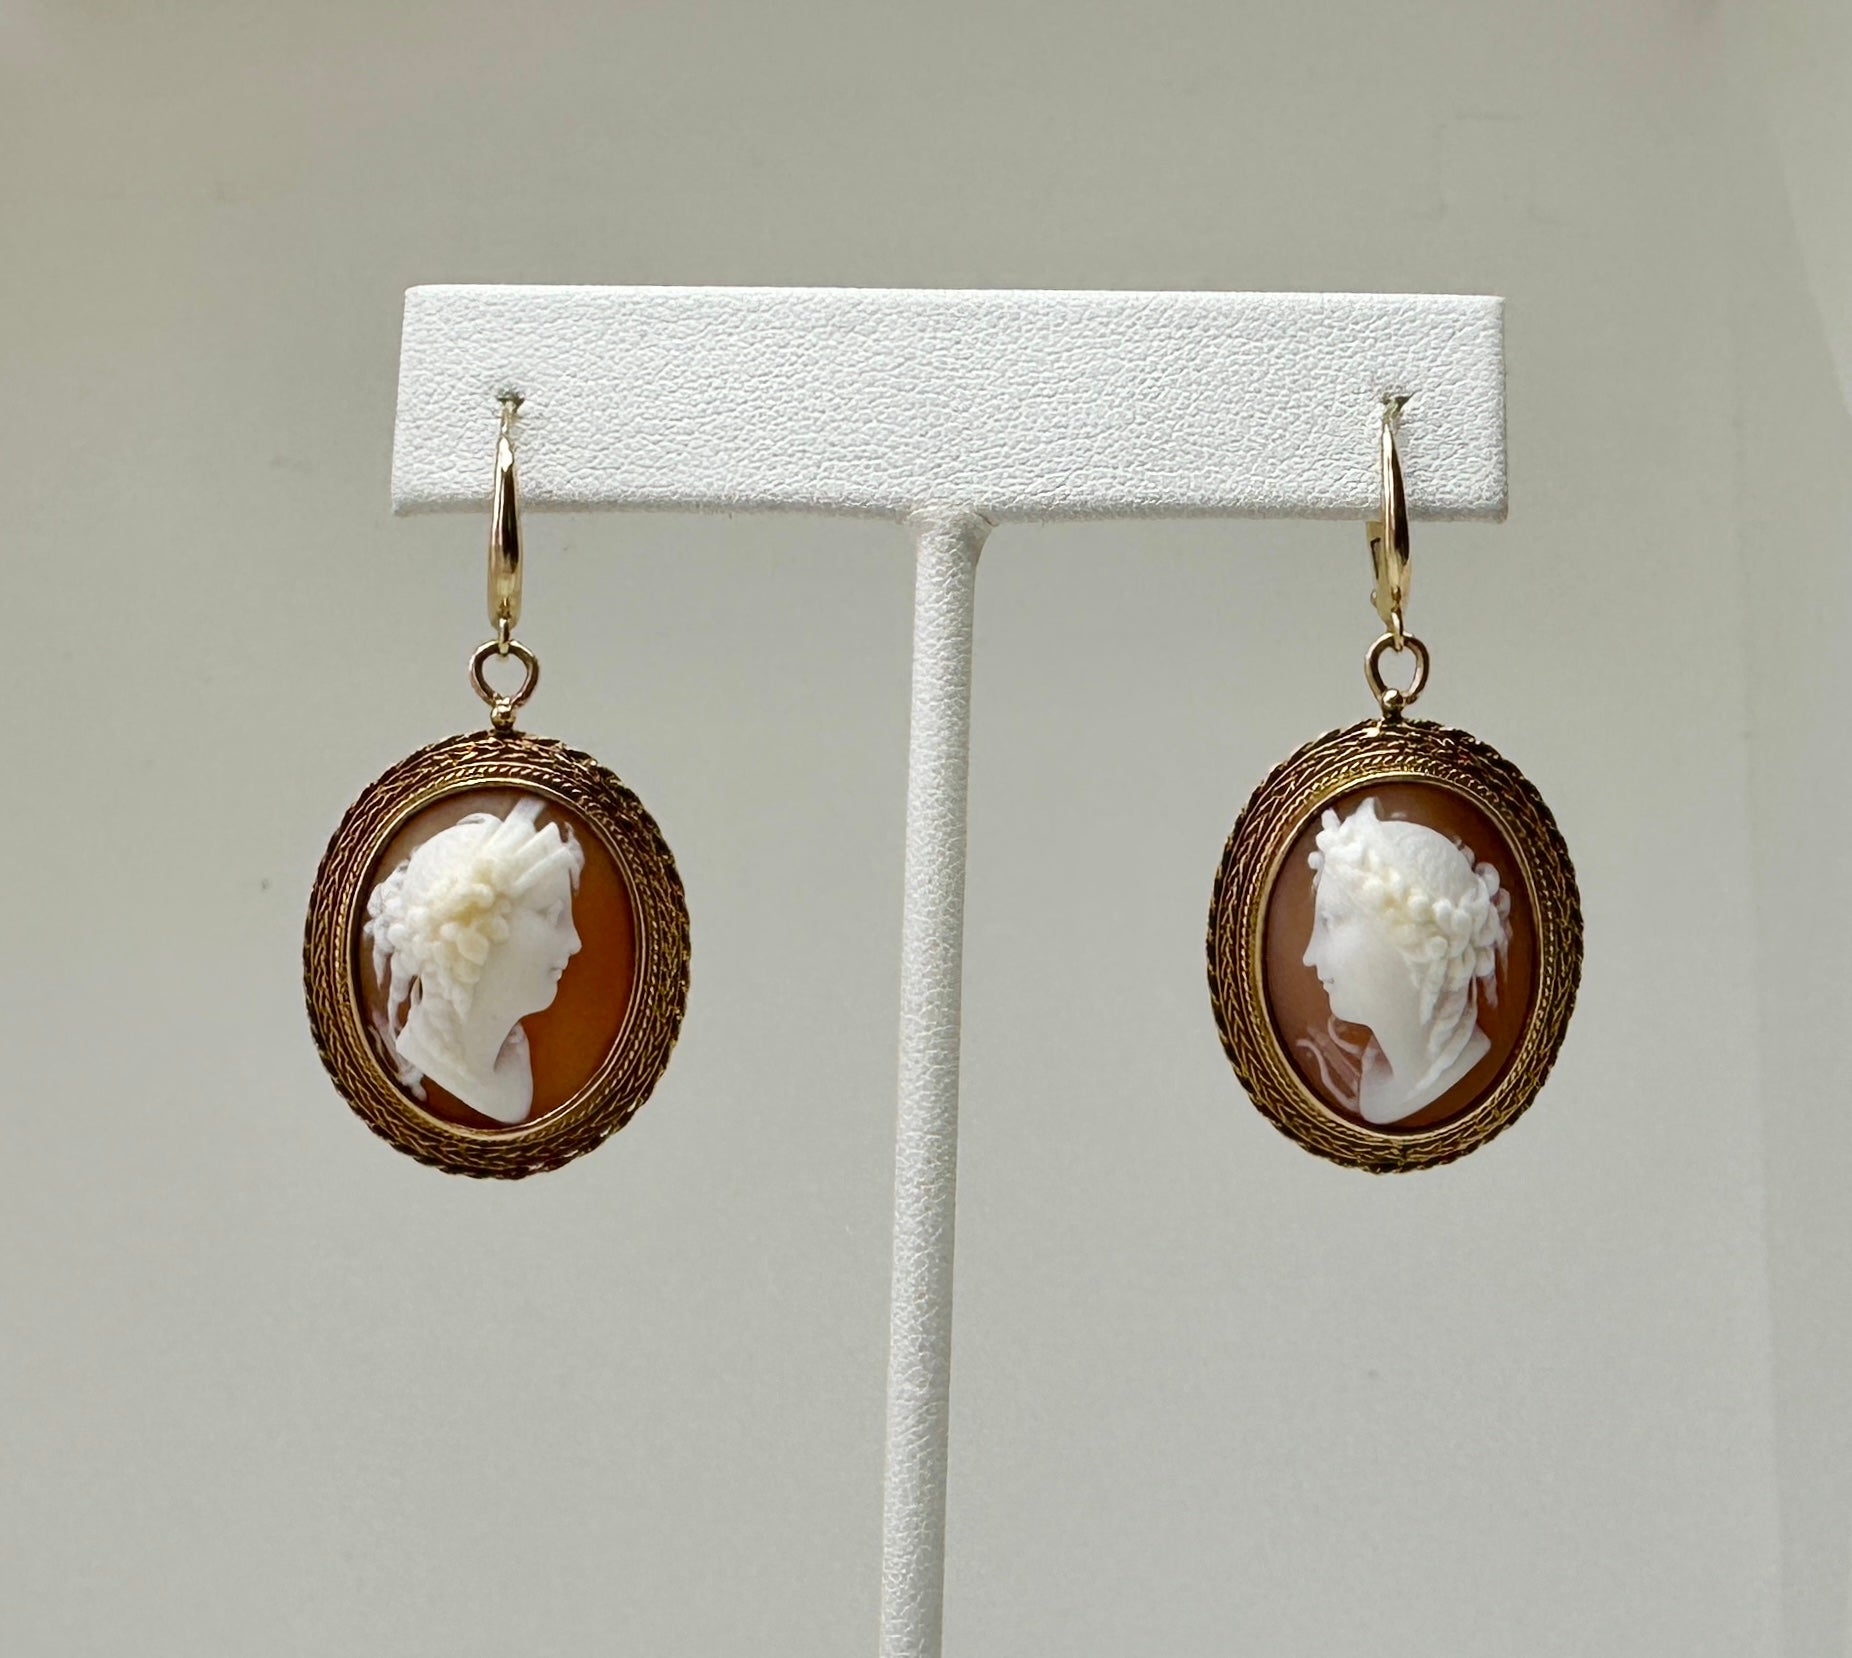 This is a spectacular pair of Antique Victorian Goddess Woman Shell Cameo Pendant Dangle Drop Earrings in 10-14 Karat Gold.   These stunning earrings are of the highest quality.  They have extraordinary hand carved Cameos of two Goddesses.  The two